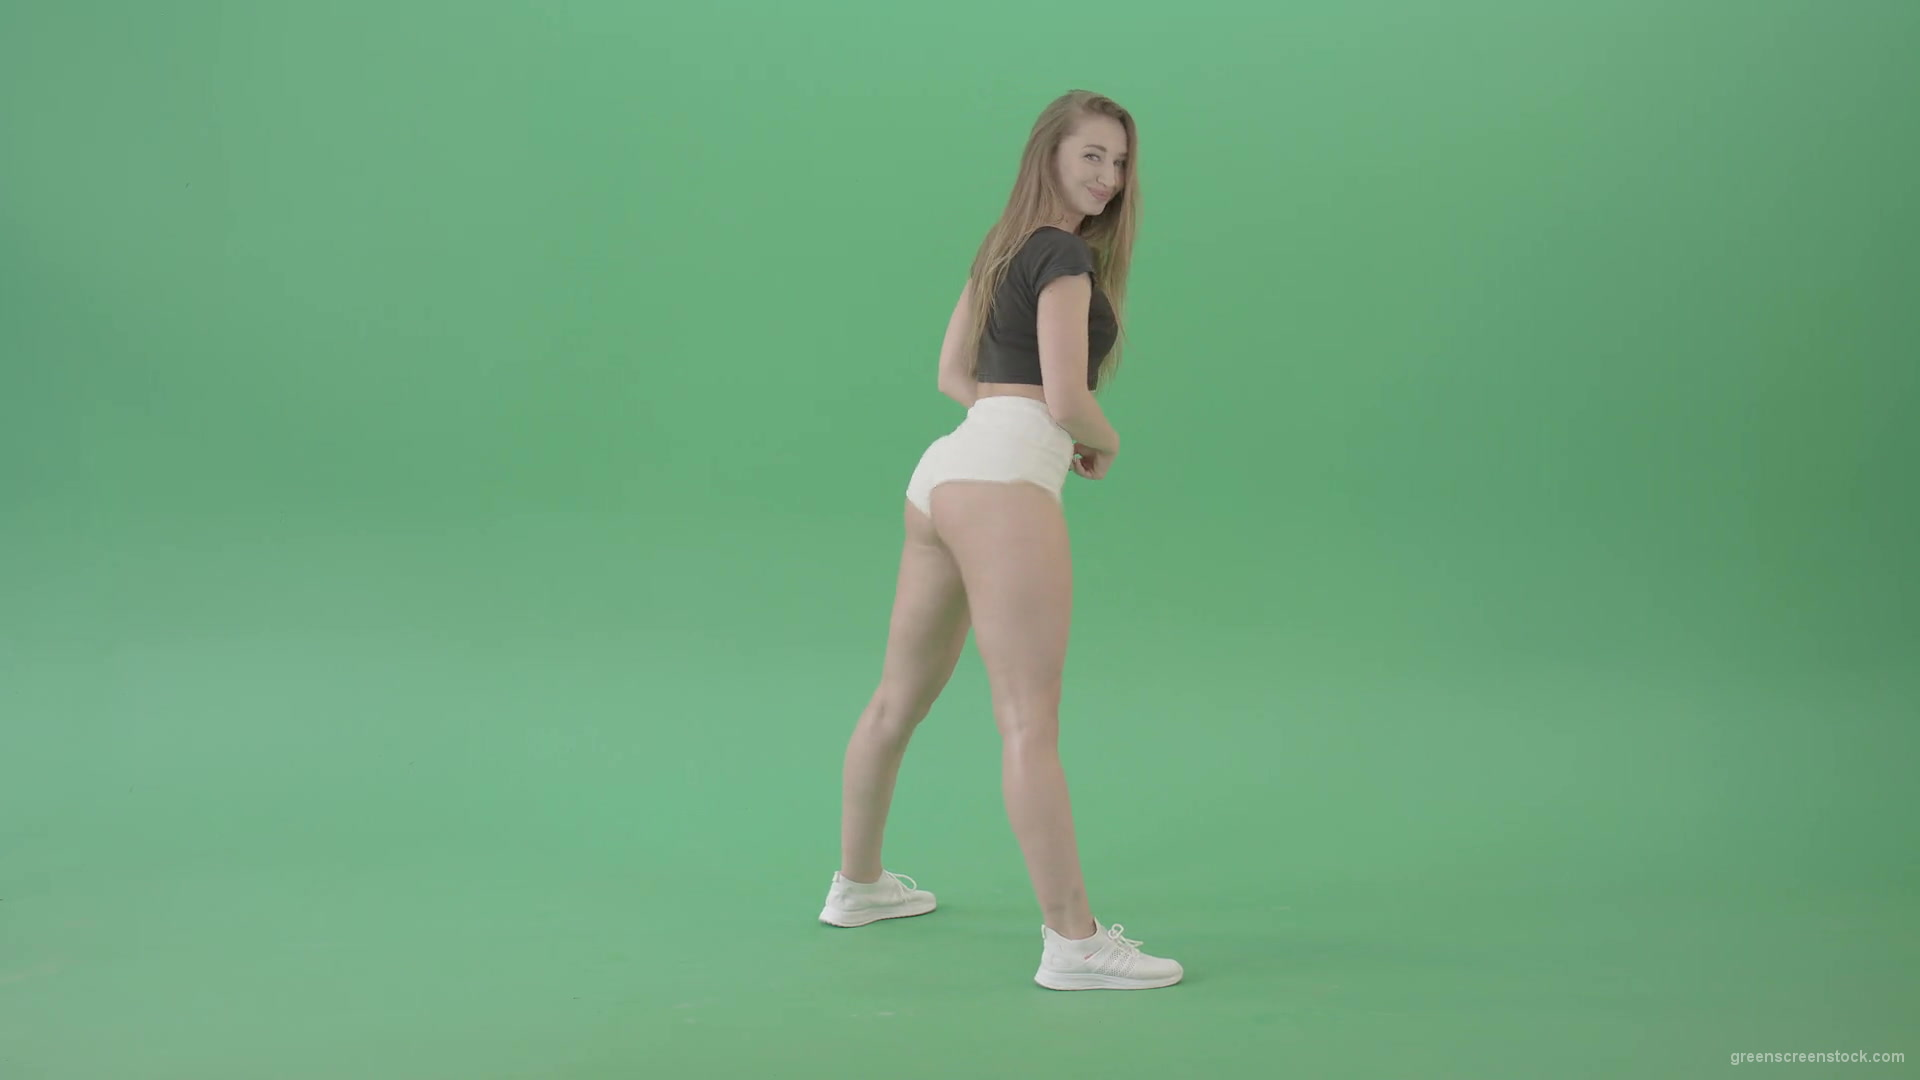 Amazing-young-woman-shaking-ass-in-side-view-twerking-dance-over-green-screen-4K-Video-Footage-1920_006 Green Screen Stock